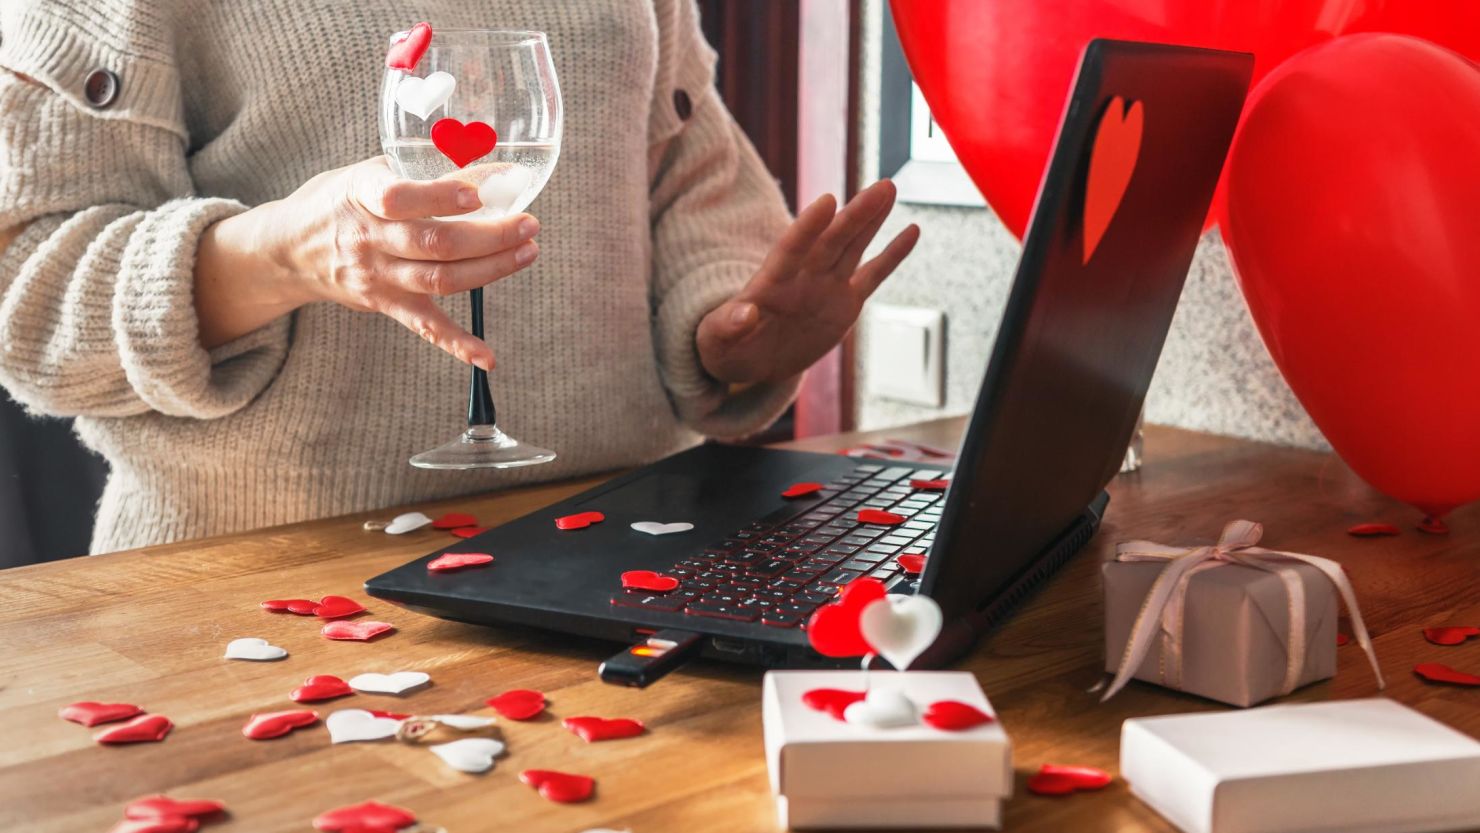 For Valentine's Day, set up a video call with your partner and celebrate with wine and a shared activity like painting.